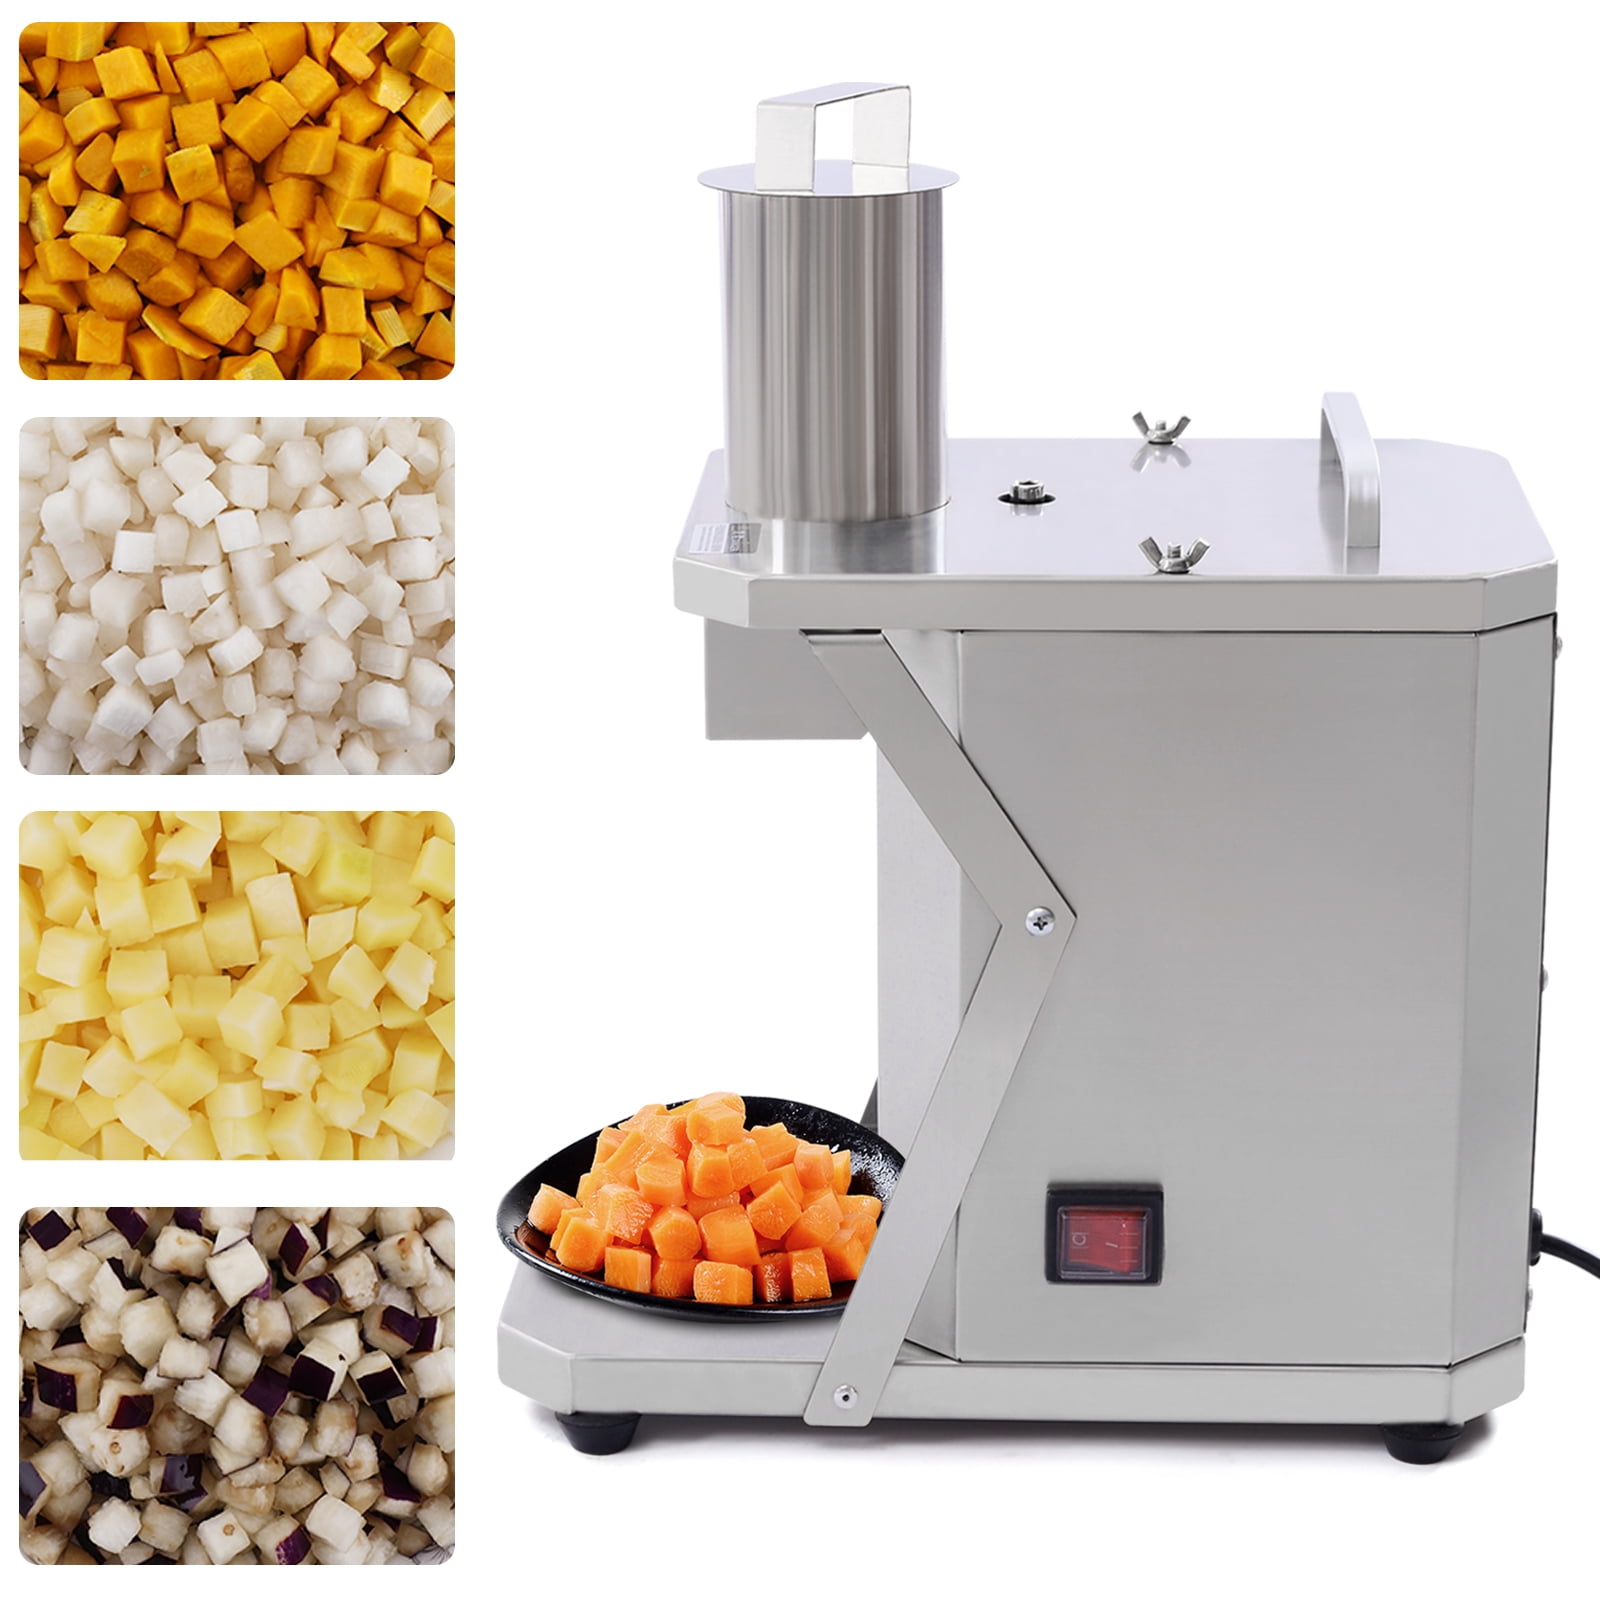  Electric Vegetable Dicer Commercial Food Chopper Dicer with  8/10/12mm Blades Stainless Steel Automatic Fruit and Vegetable Cutter for  Onions Potatoes Carrots Cucumber : Home & Kitchen